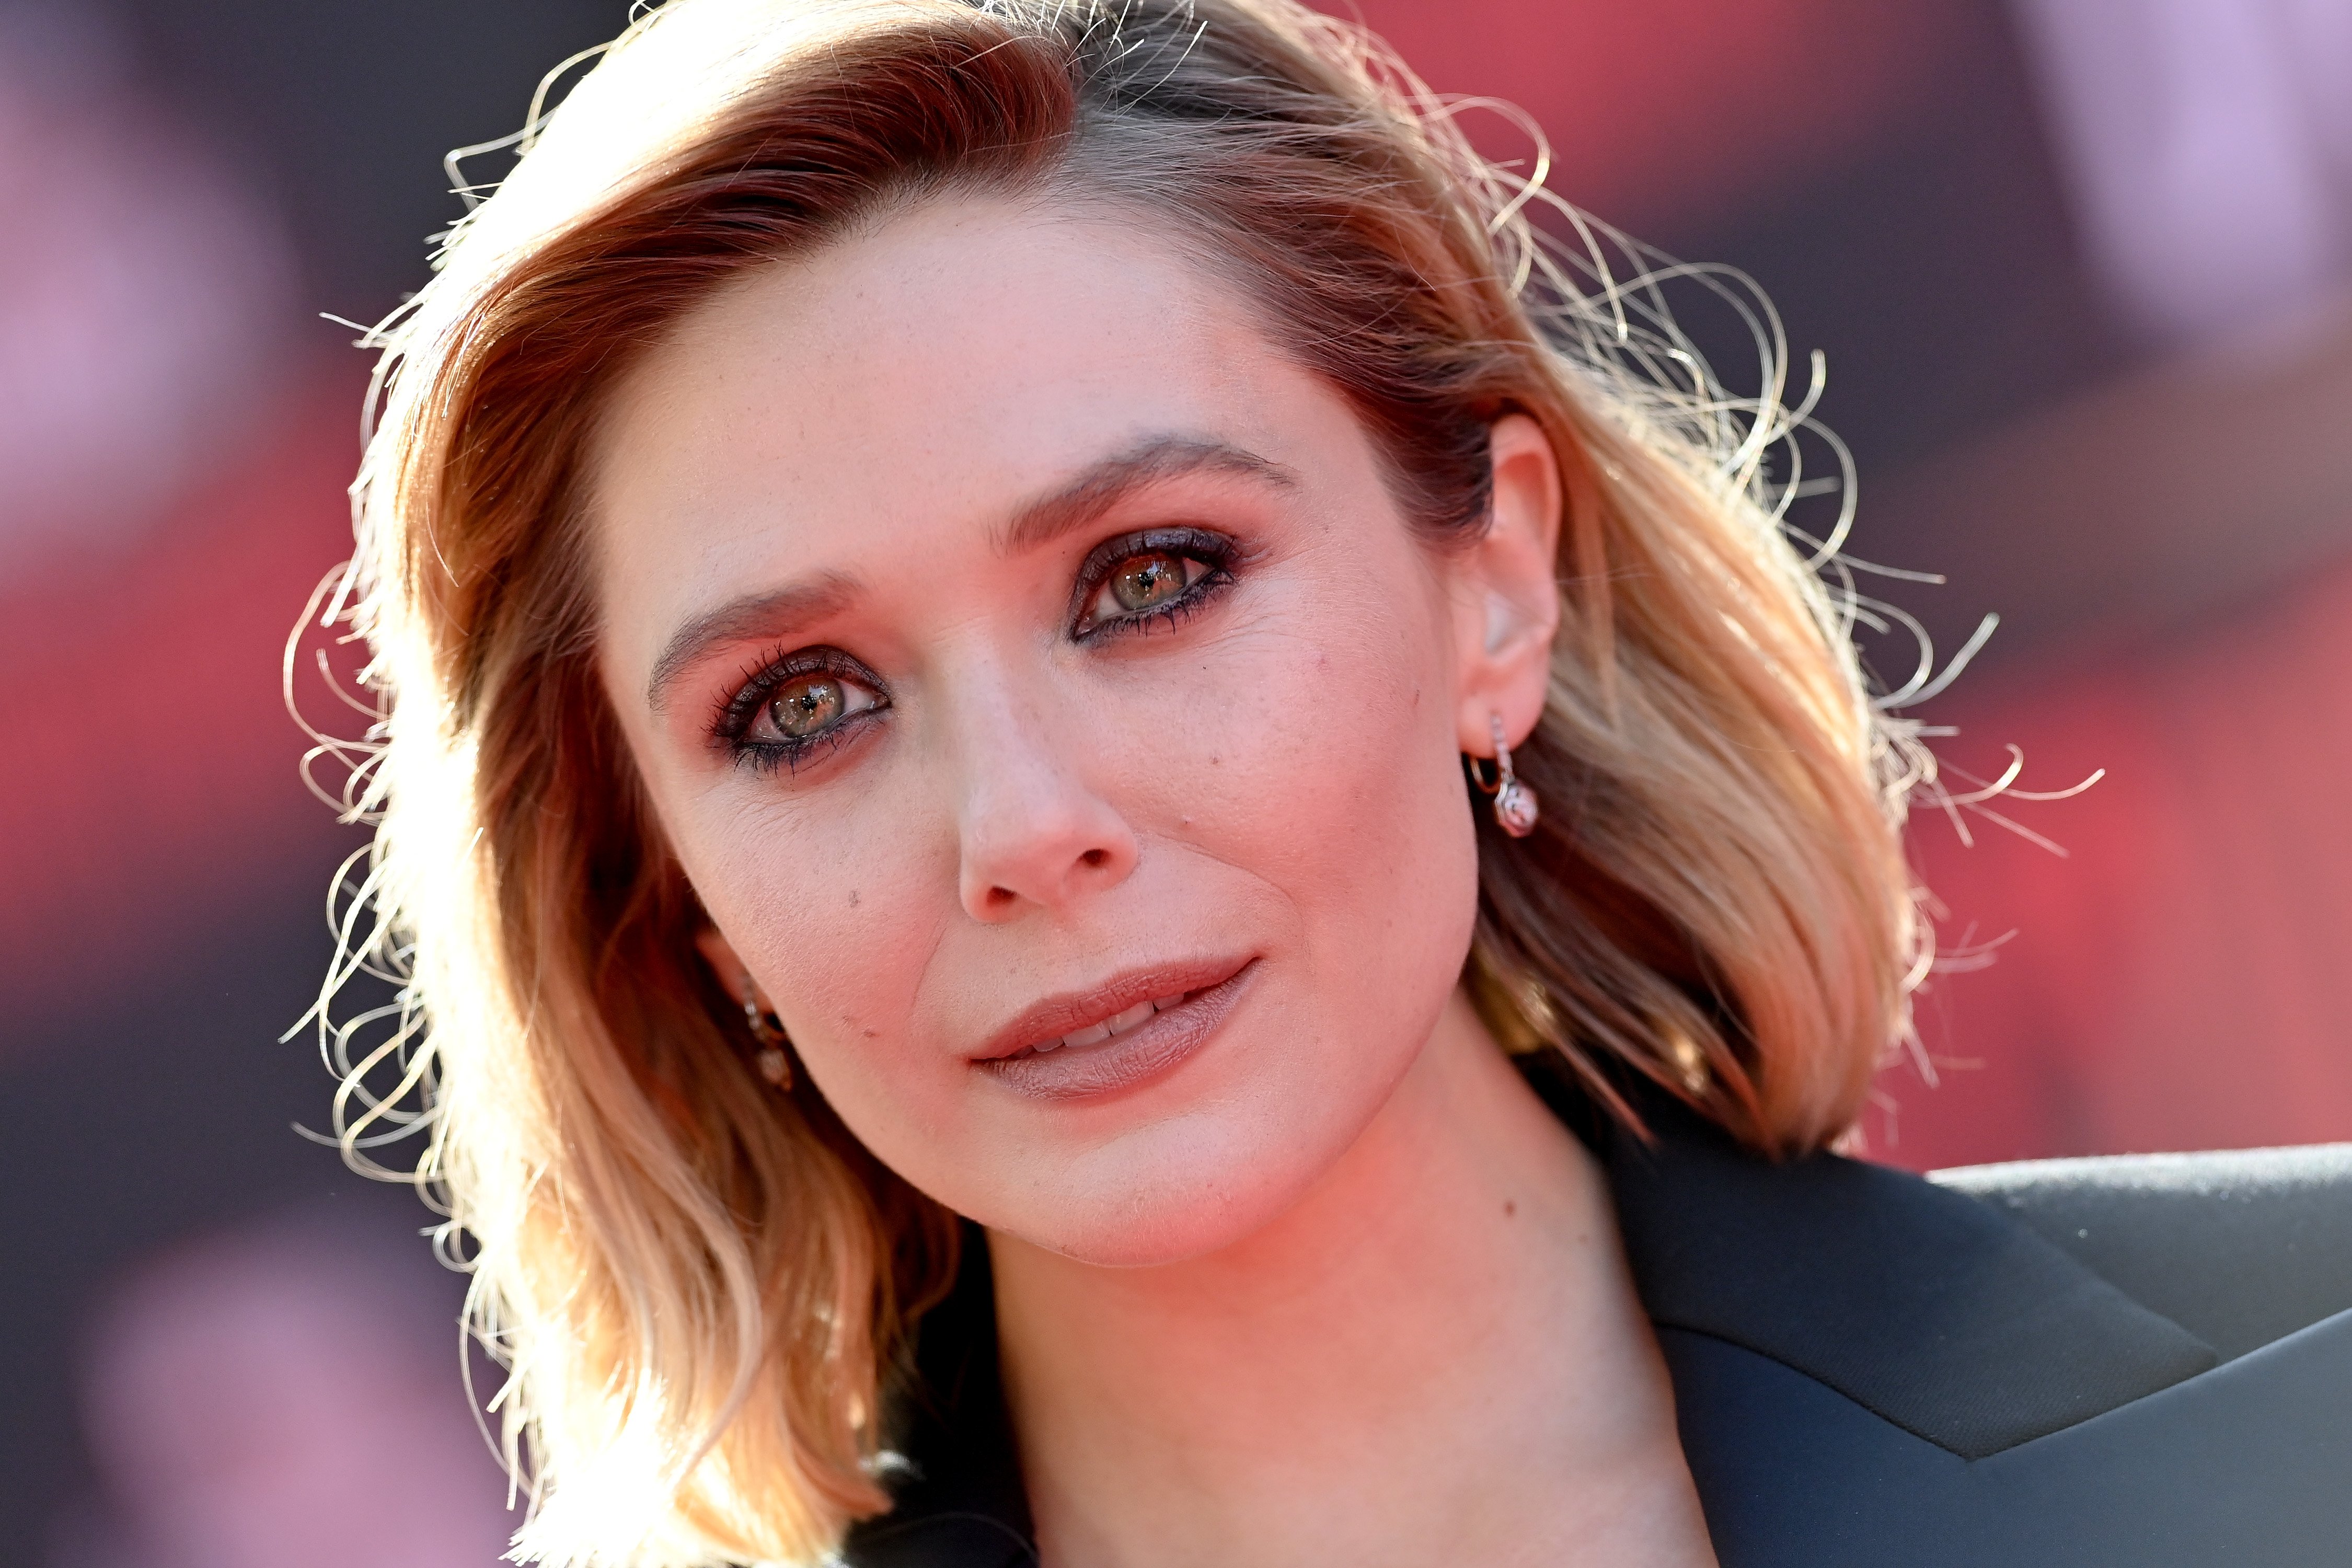 Elizabeth Olsen, who plays the Scarlet Witch in the MCU, wears a black suit.